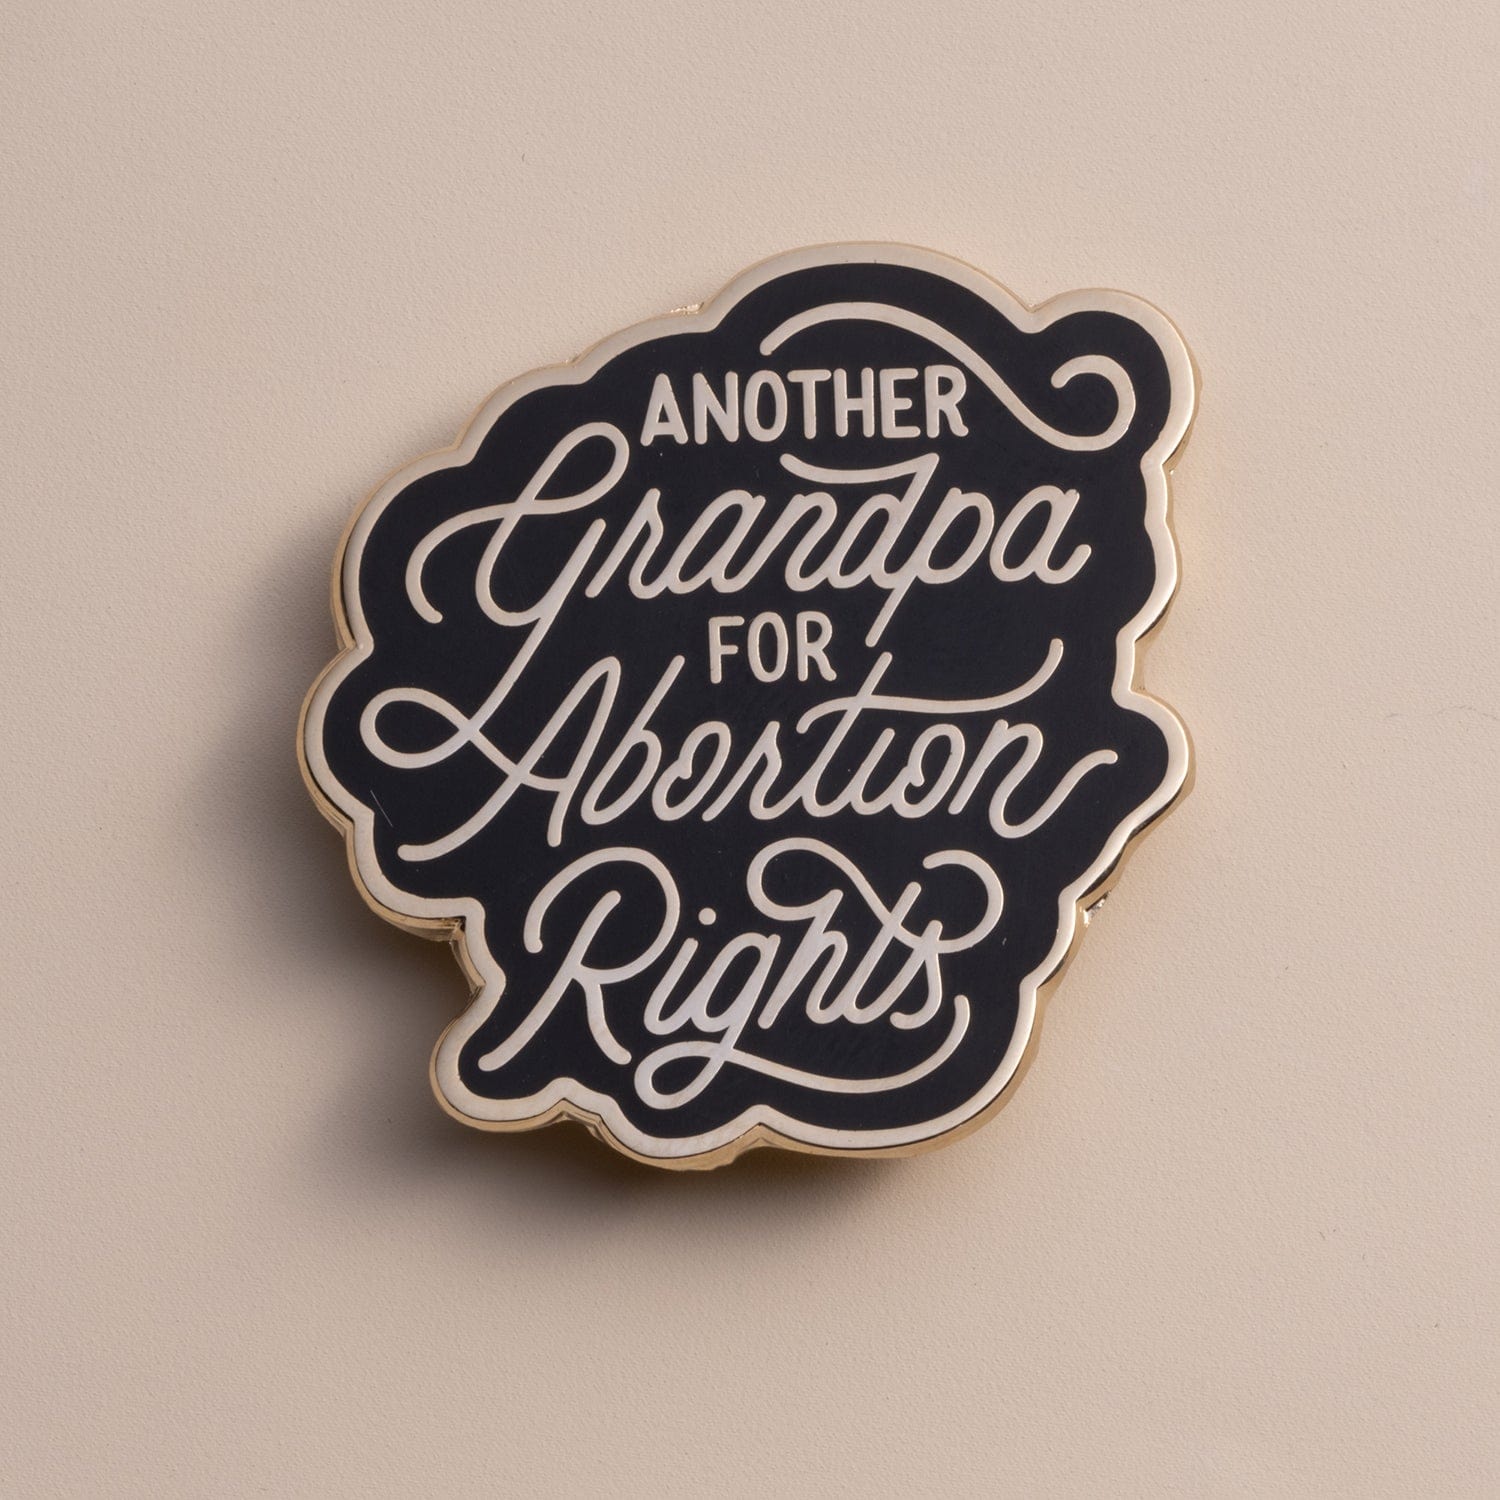 Abortion Rights Pin